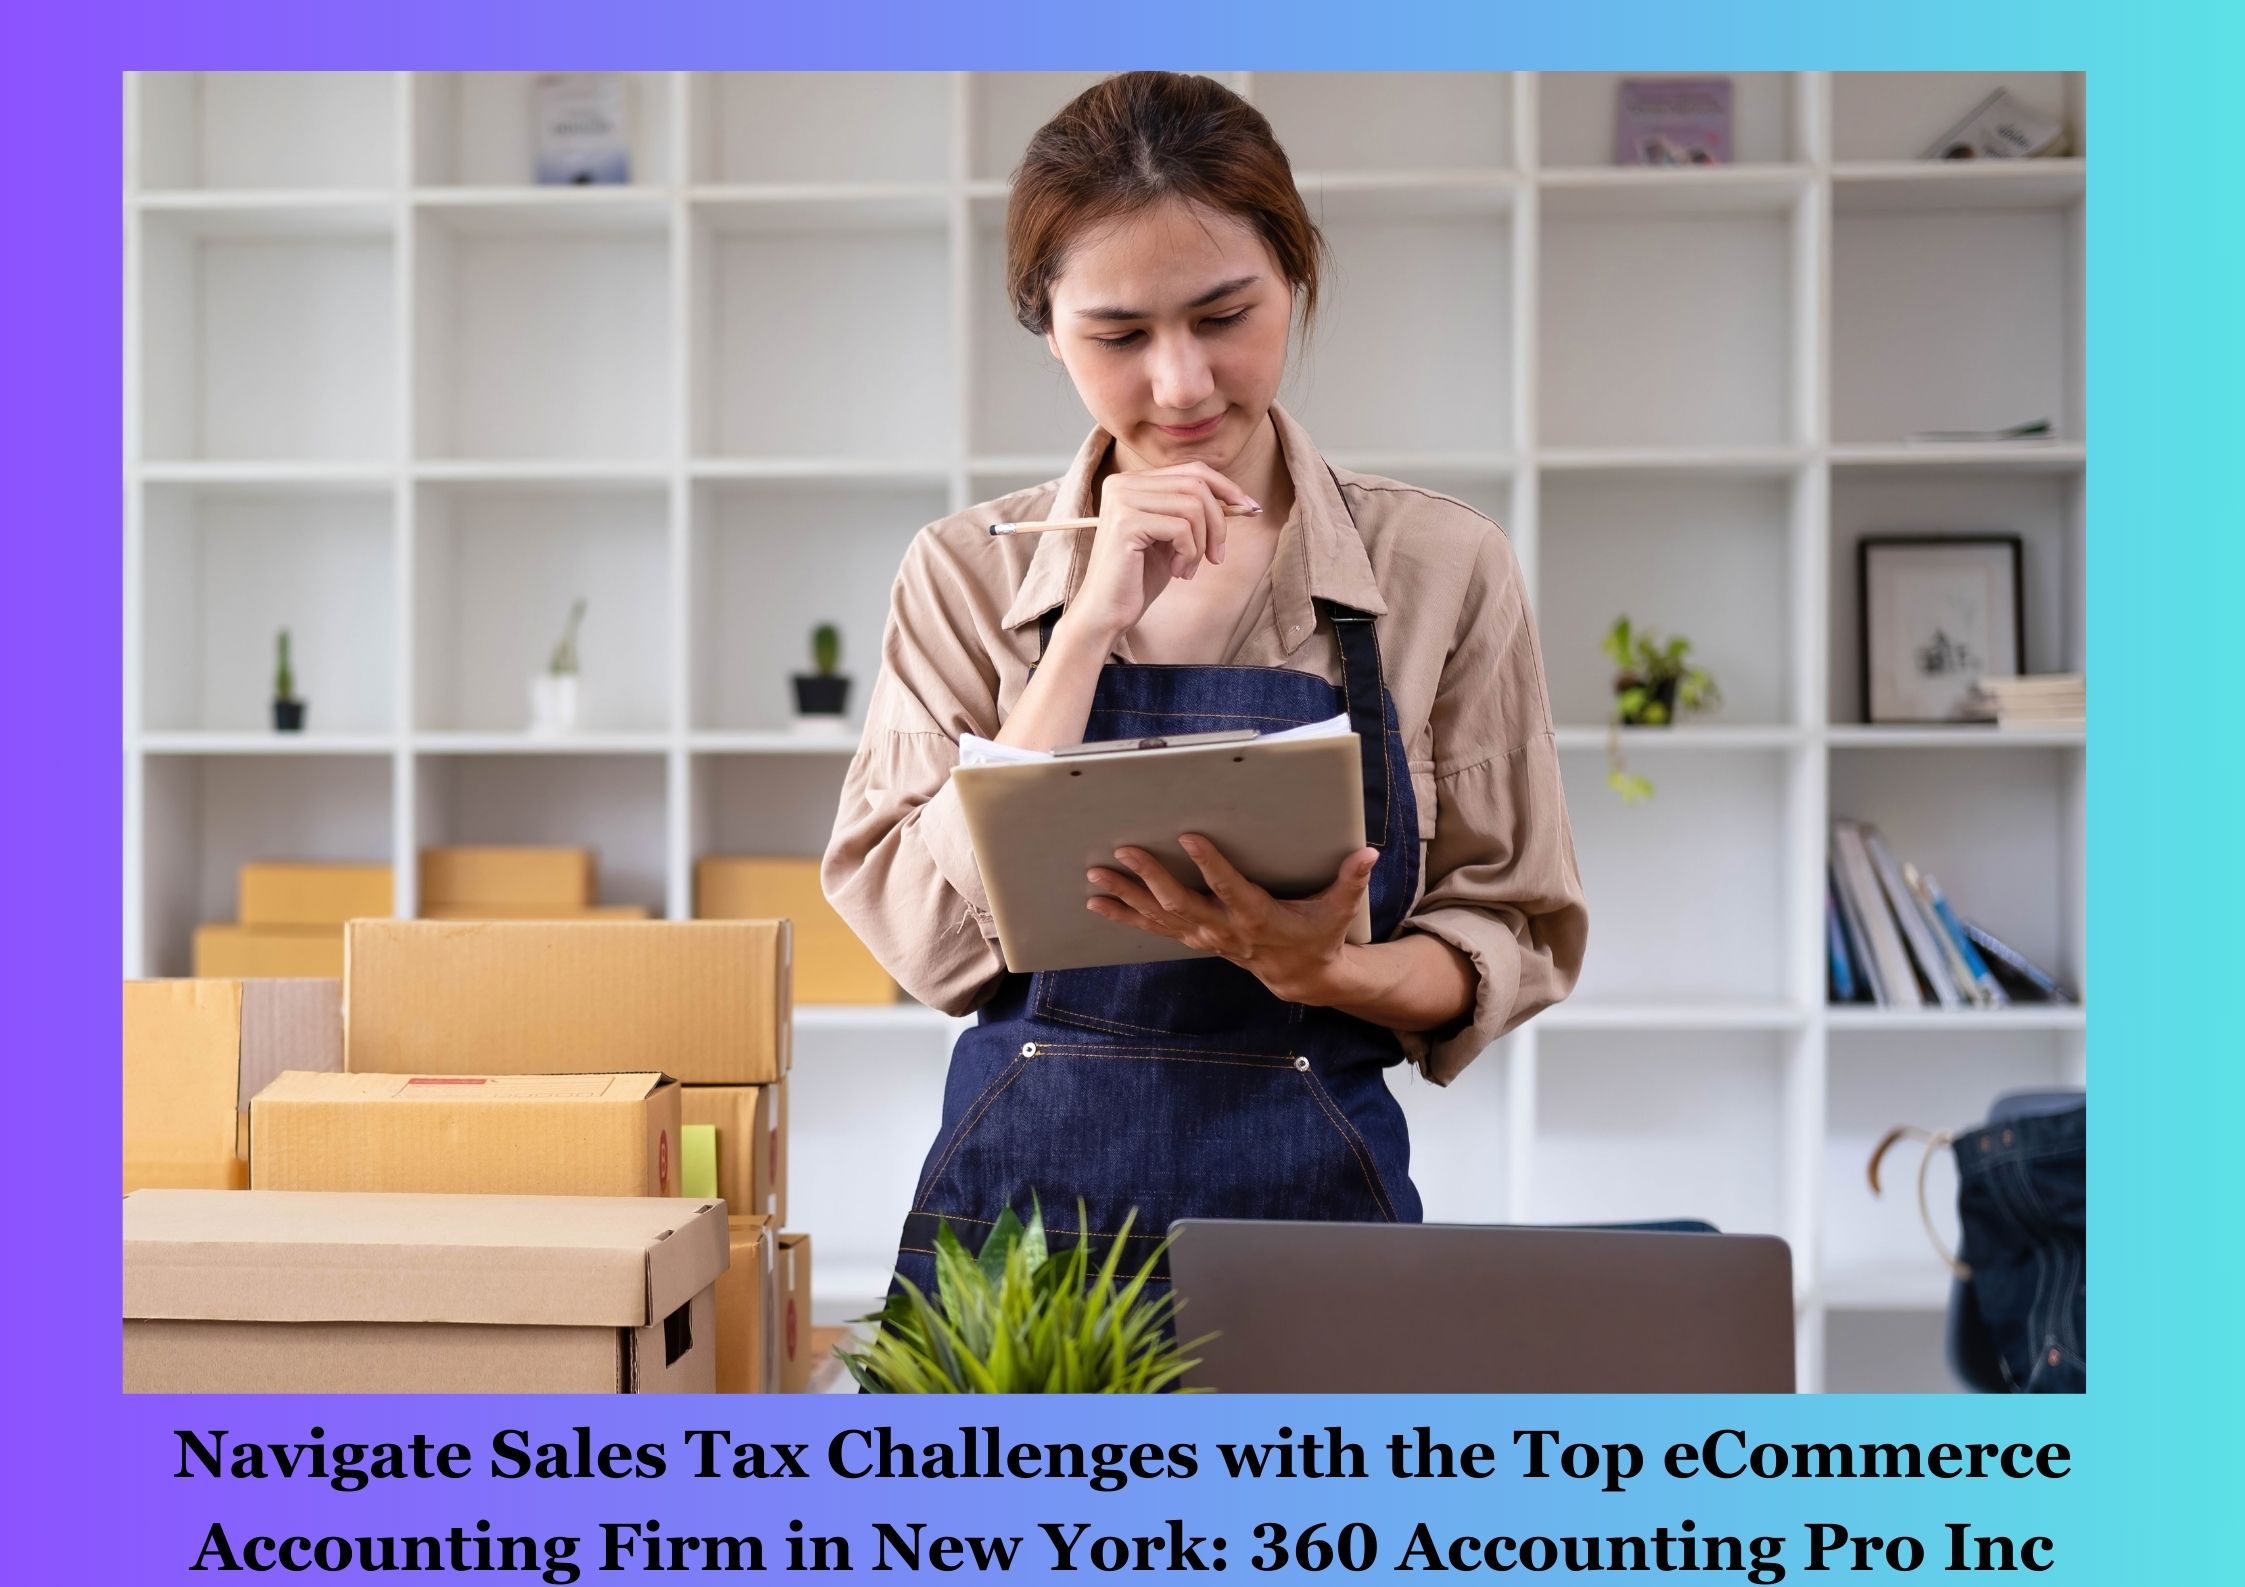 Navigate Sales Tax Challenges with the Top eCommerce Accounting Firm in New York: 360 Accounting Pro Inc